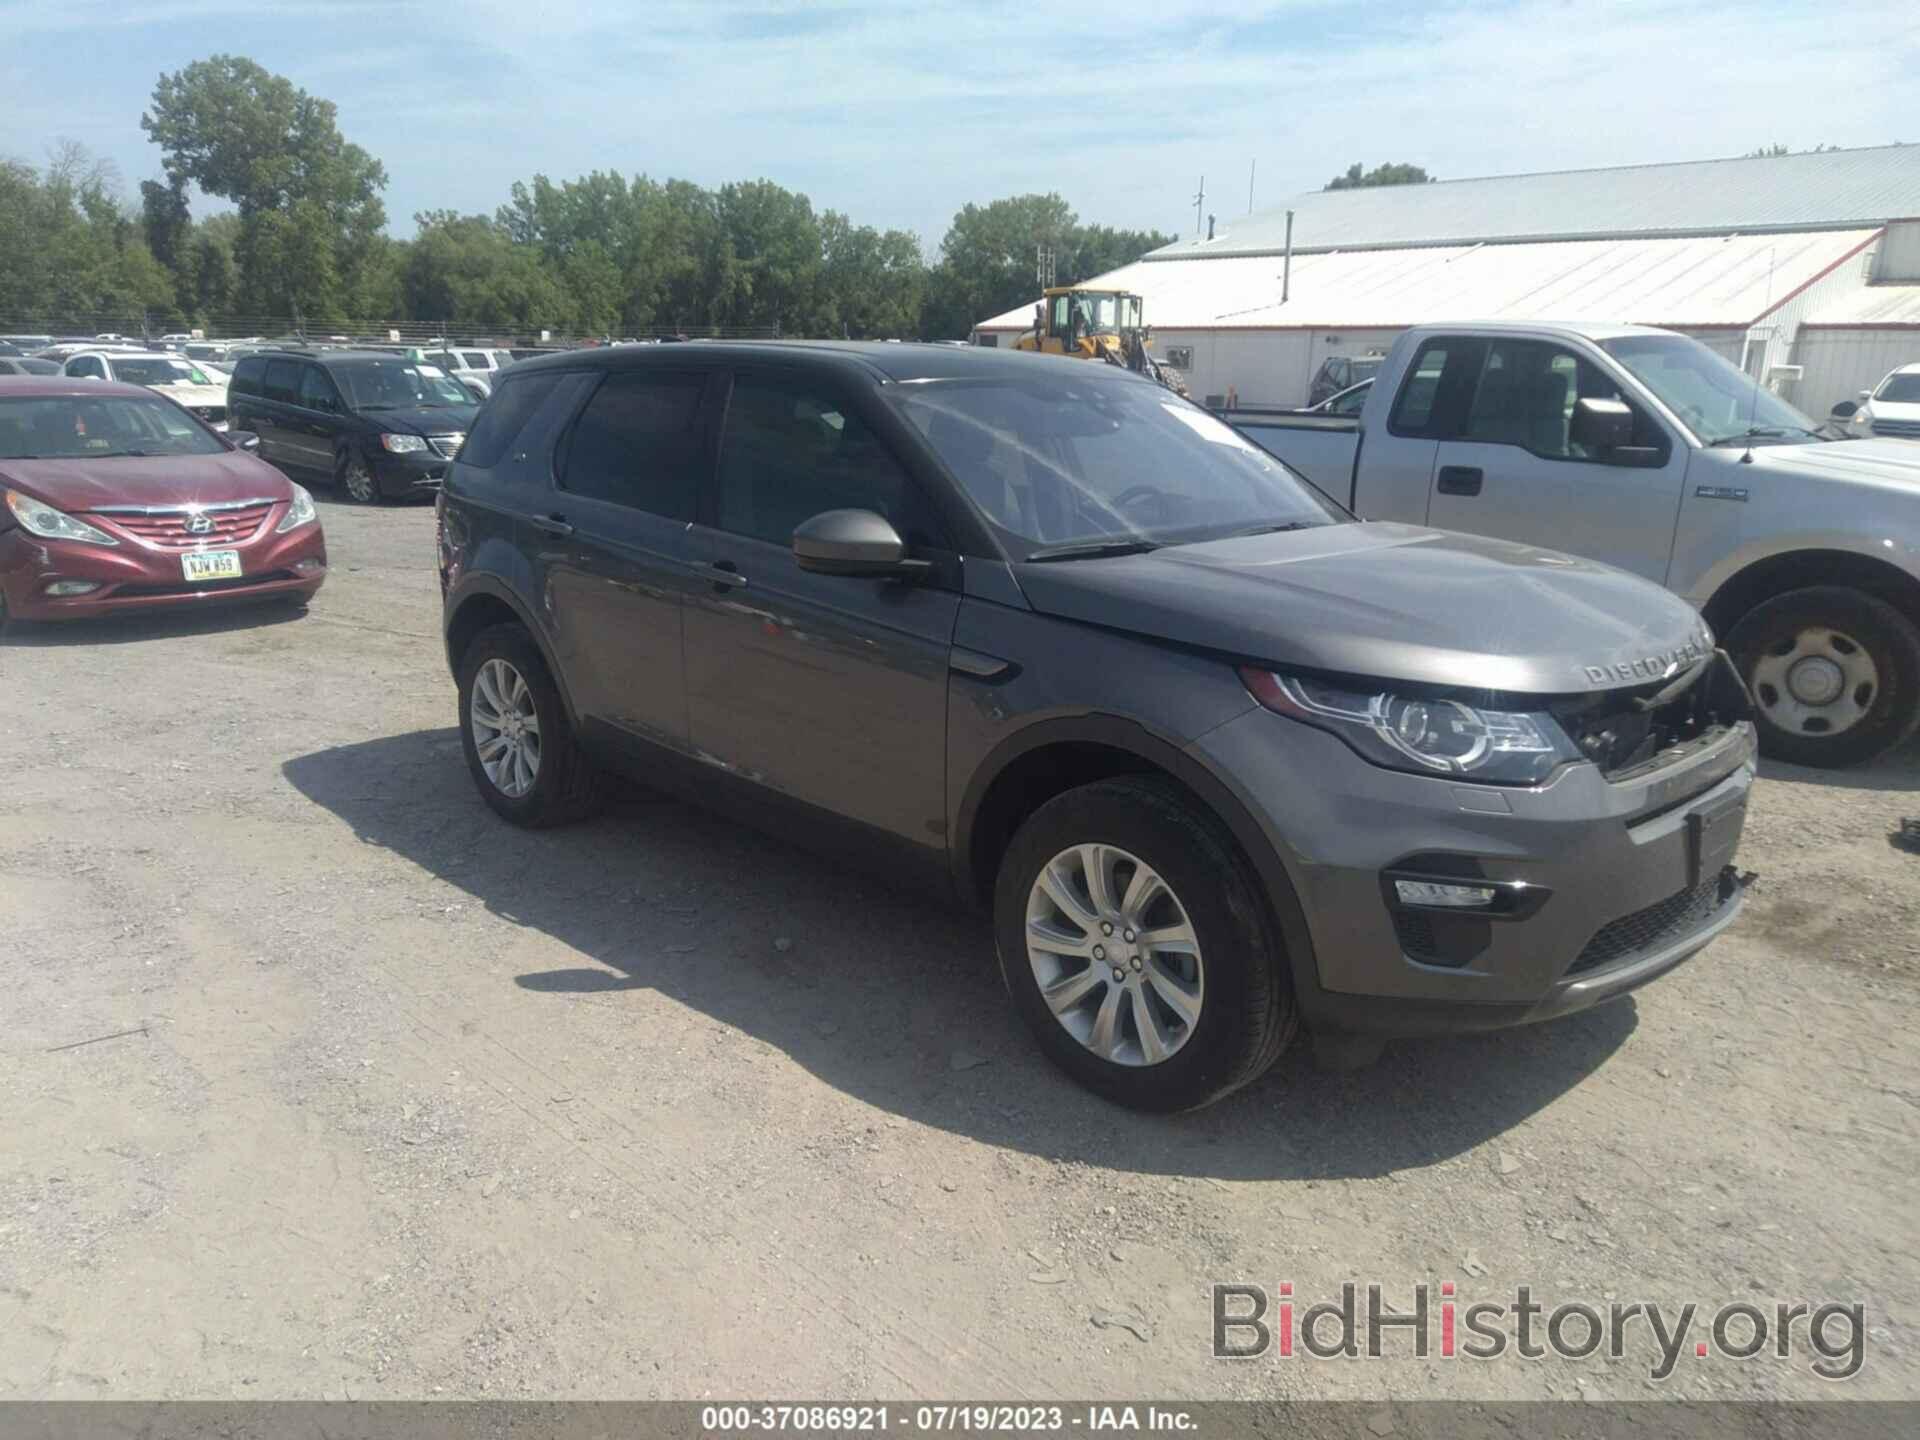 Фотография SALCP2RX9JH775980 - LAND ROVER DISCOVERY SPORT 2018